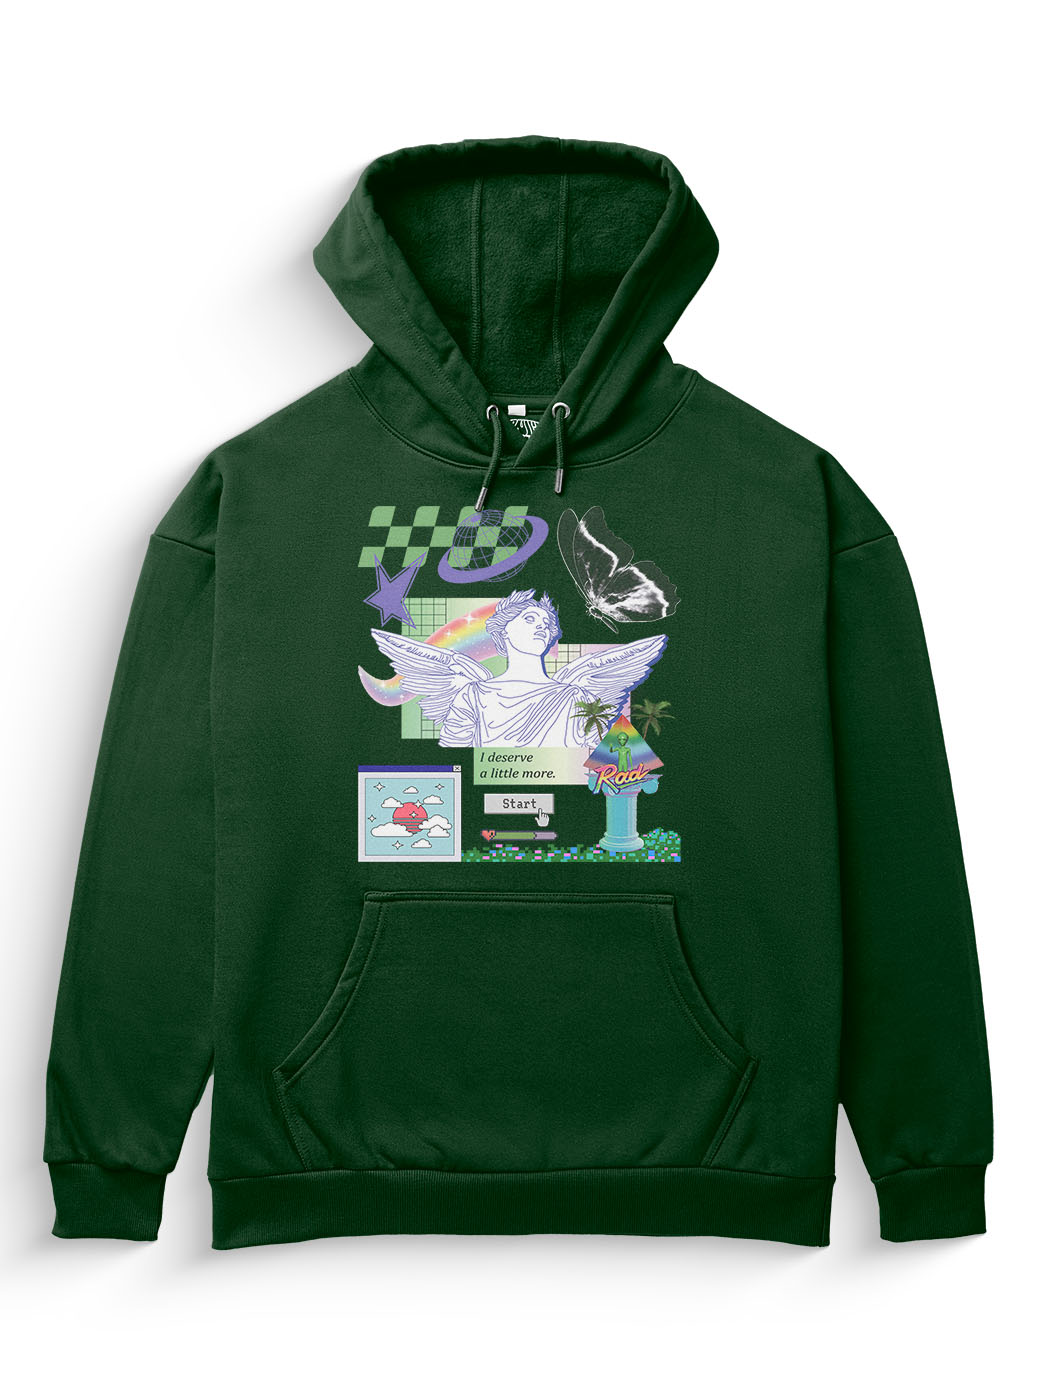 Cyber Ghetto Hoodie